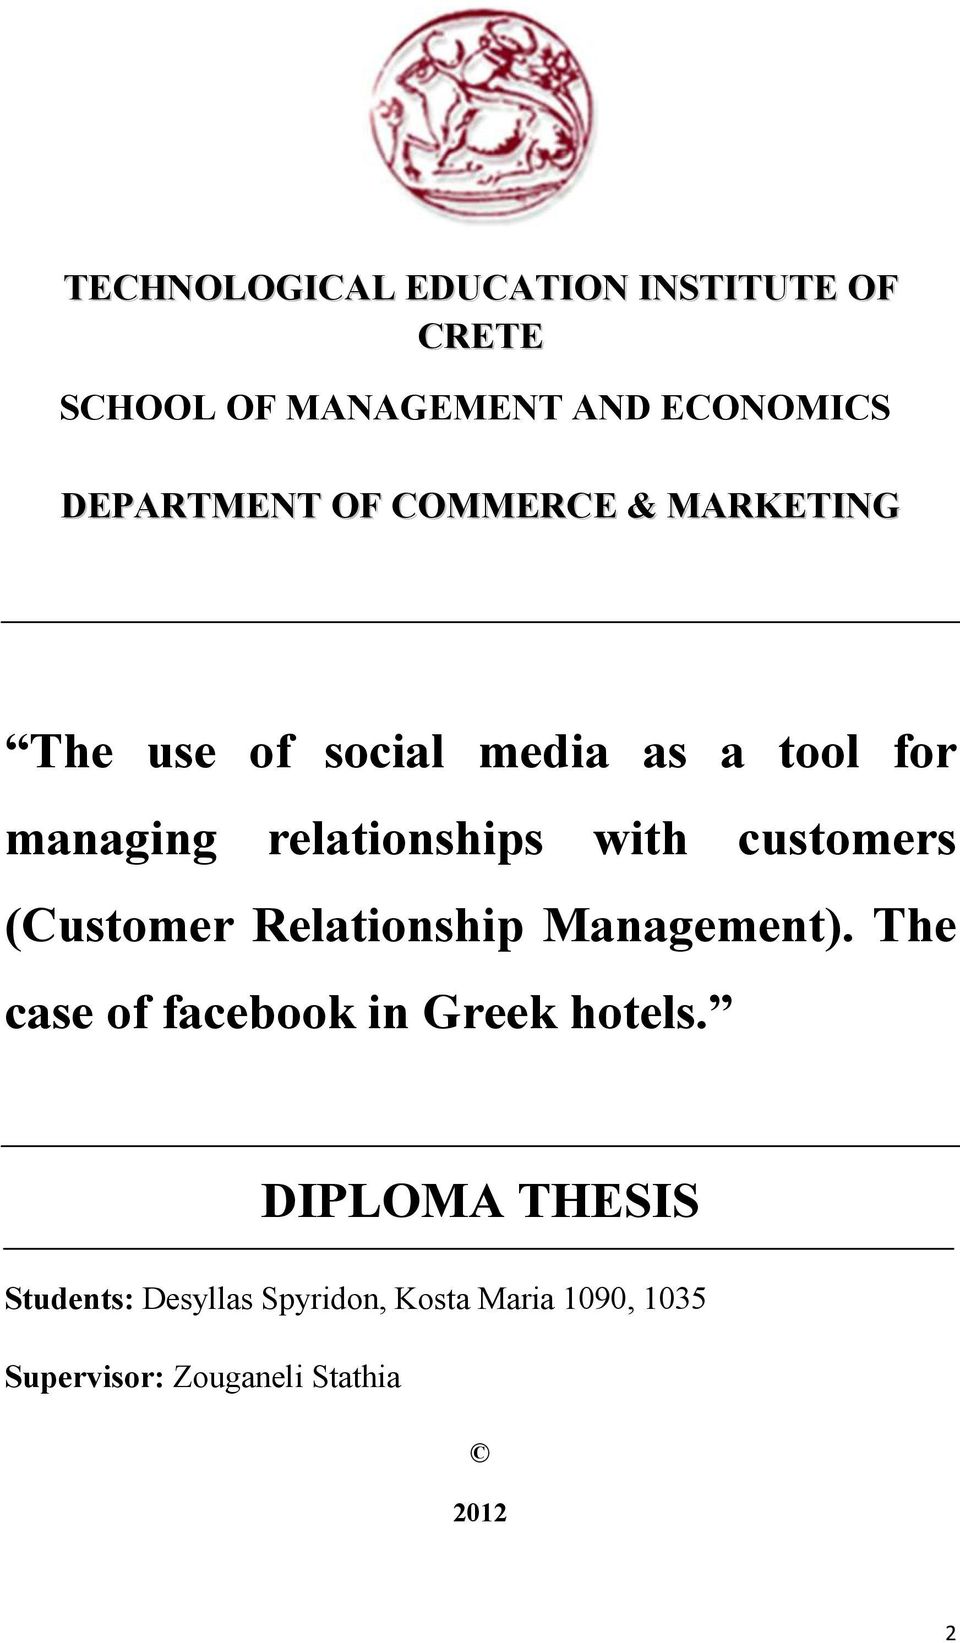 customers (Customer Relationship Management). The case of facebook in Greek hotels.